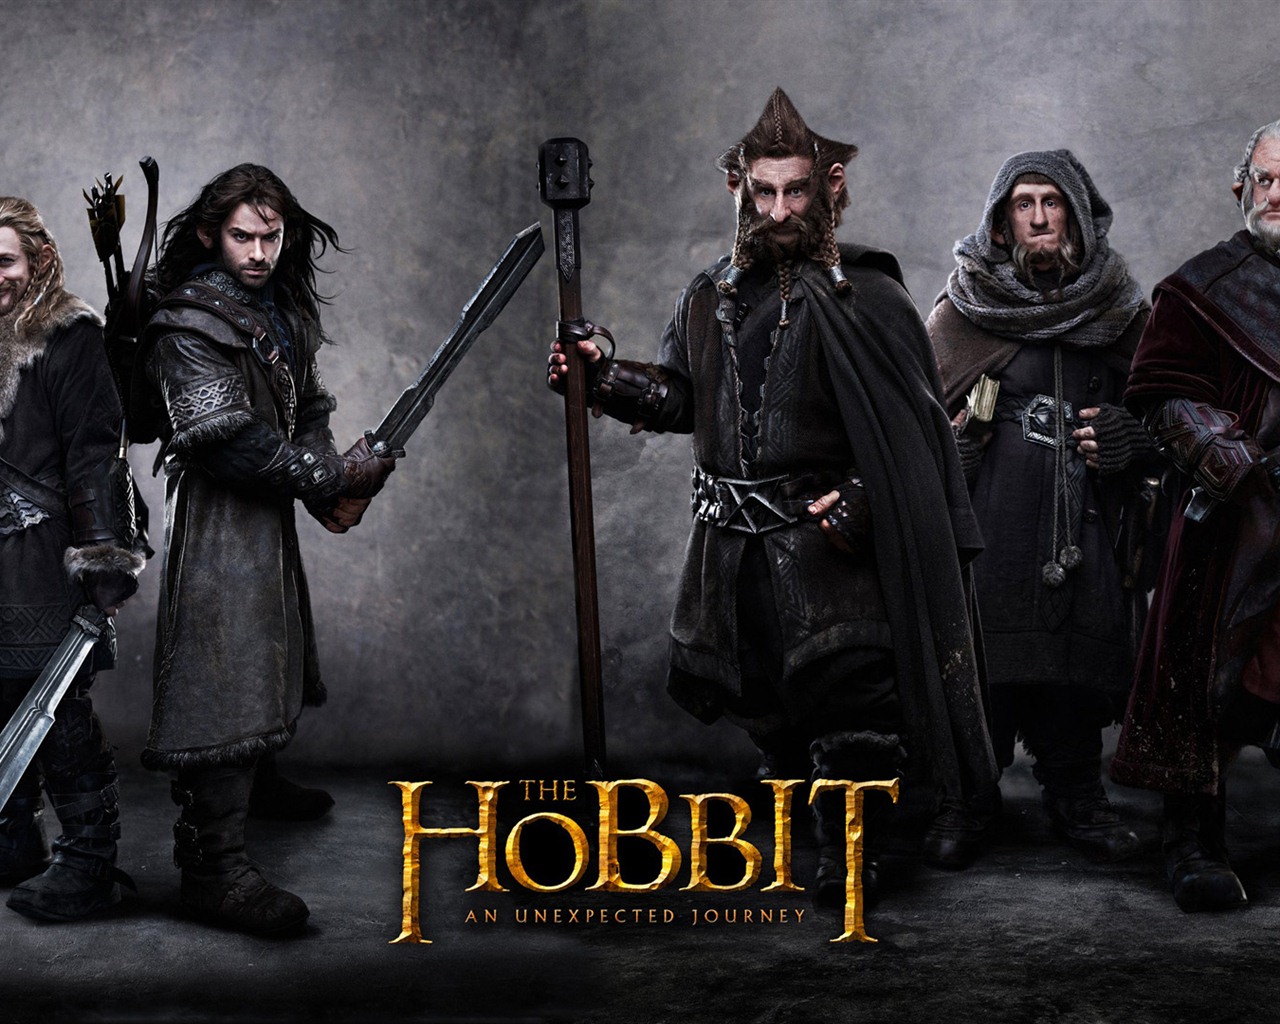 The Hobbit: An Unexpected Journey HD wallpapers #9 - 1280x1024